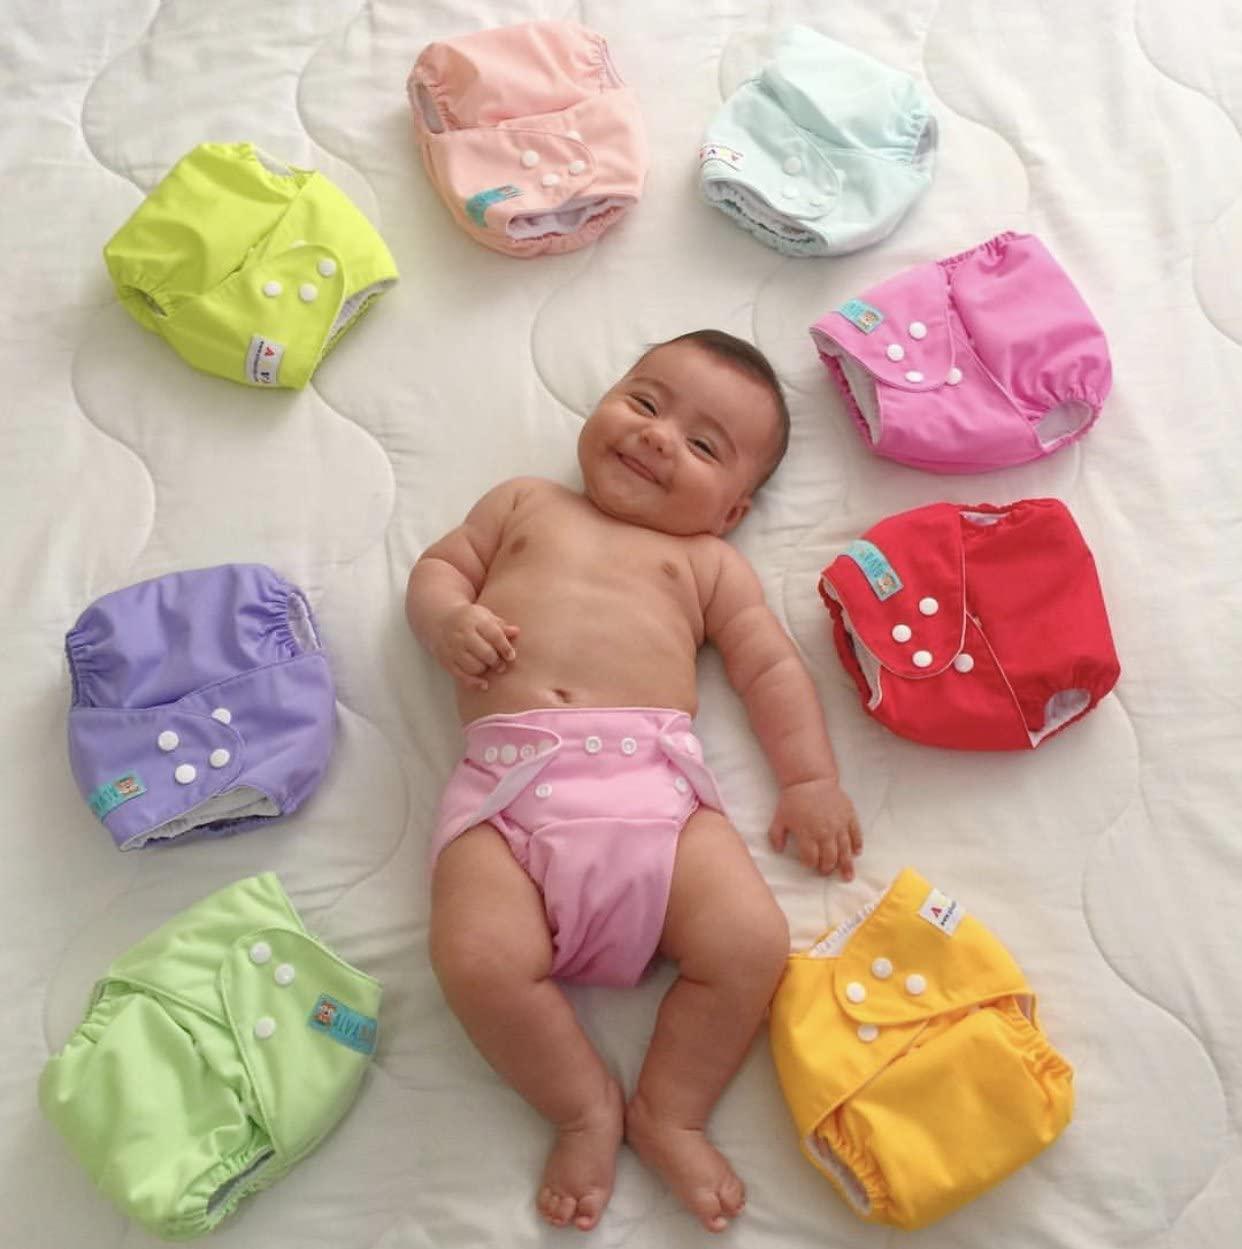 ALVABABY-cloth diapers pocket diapers and newborn diapers